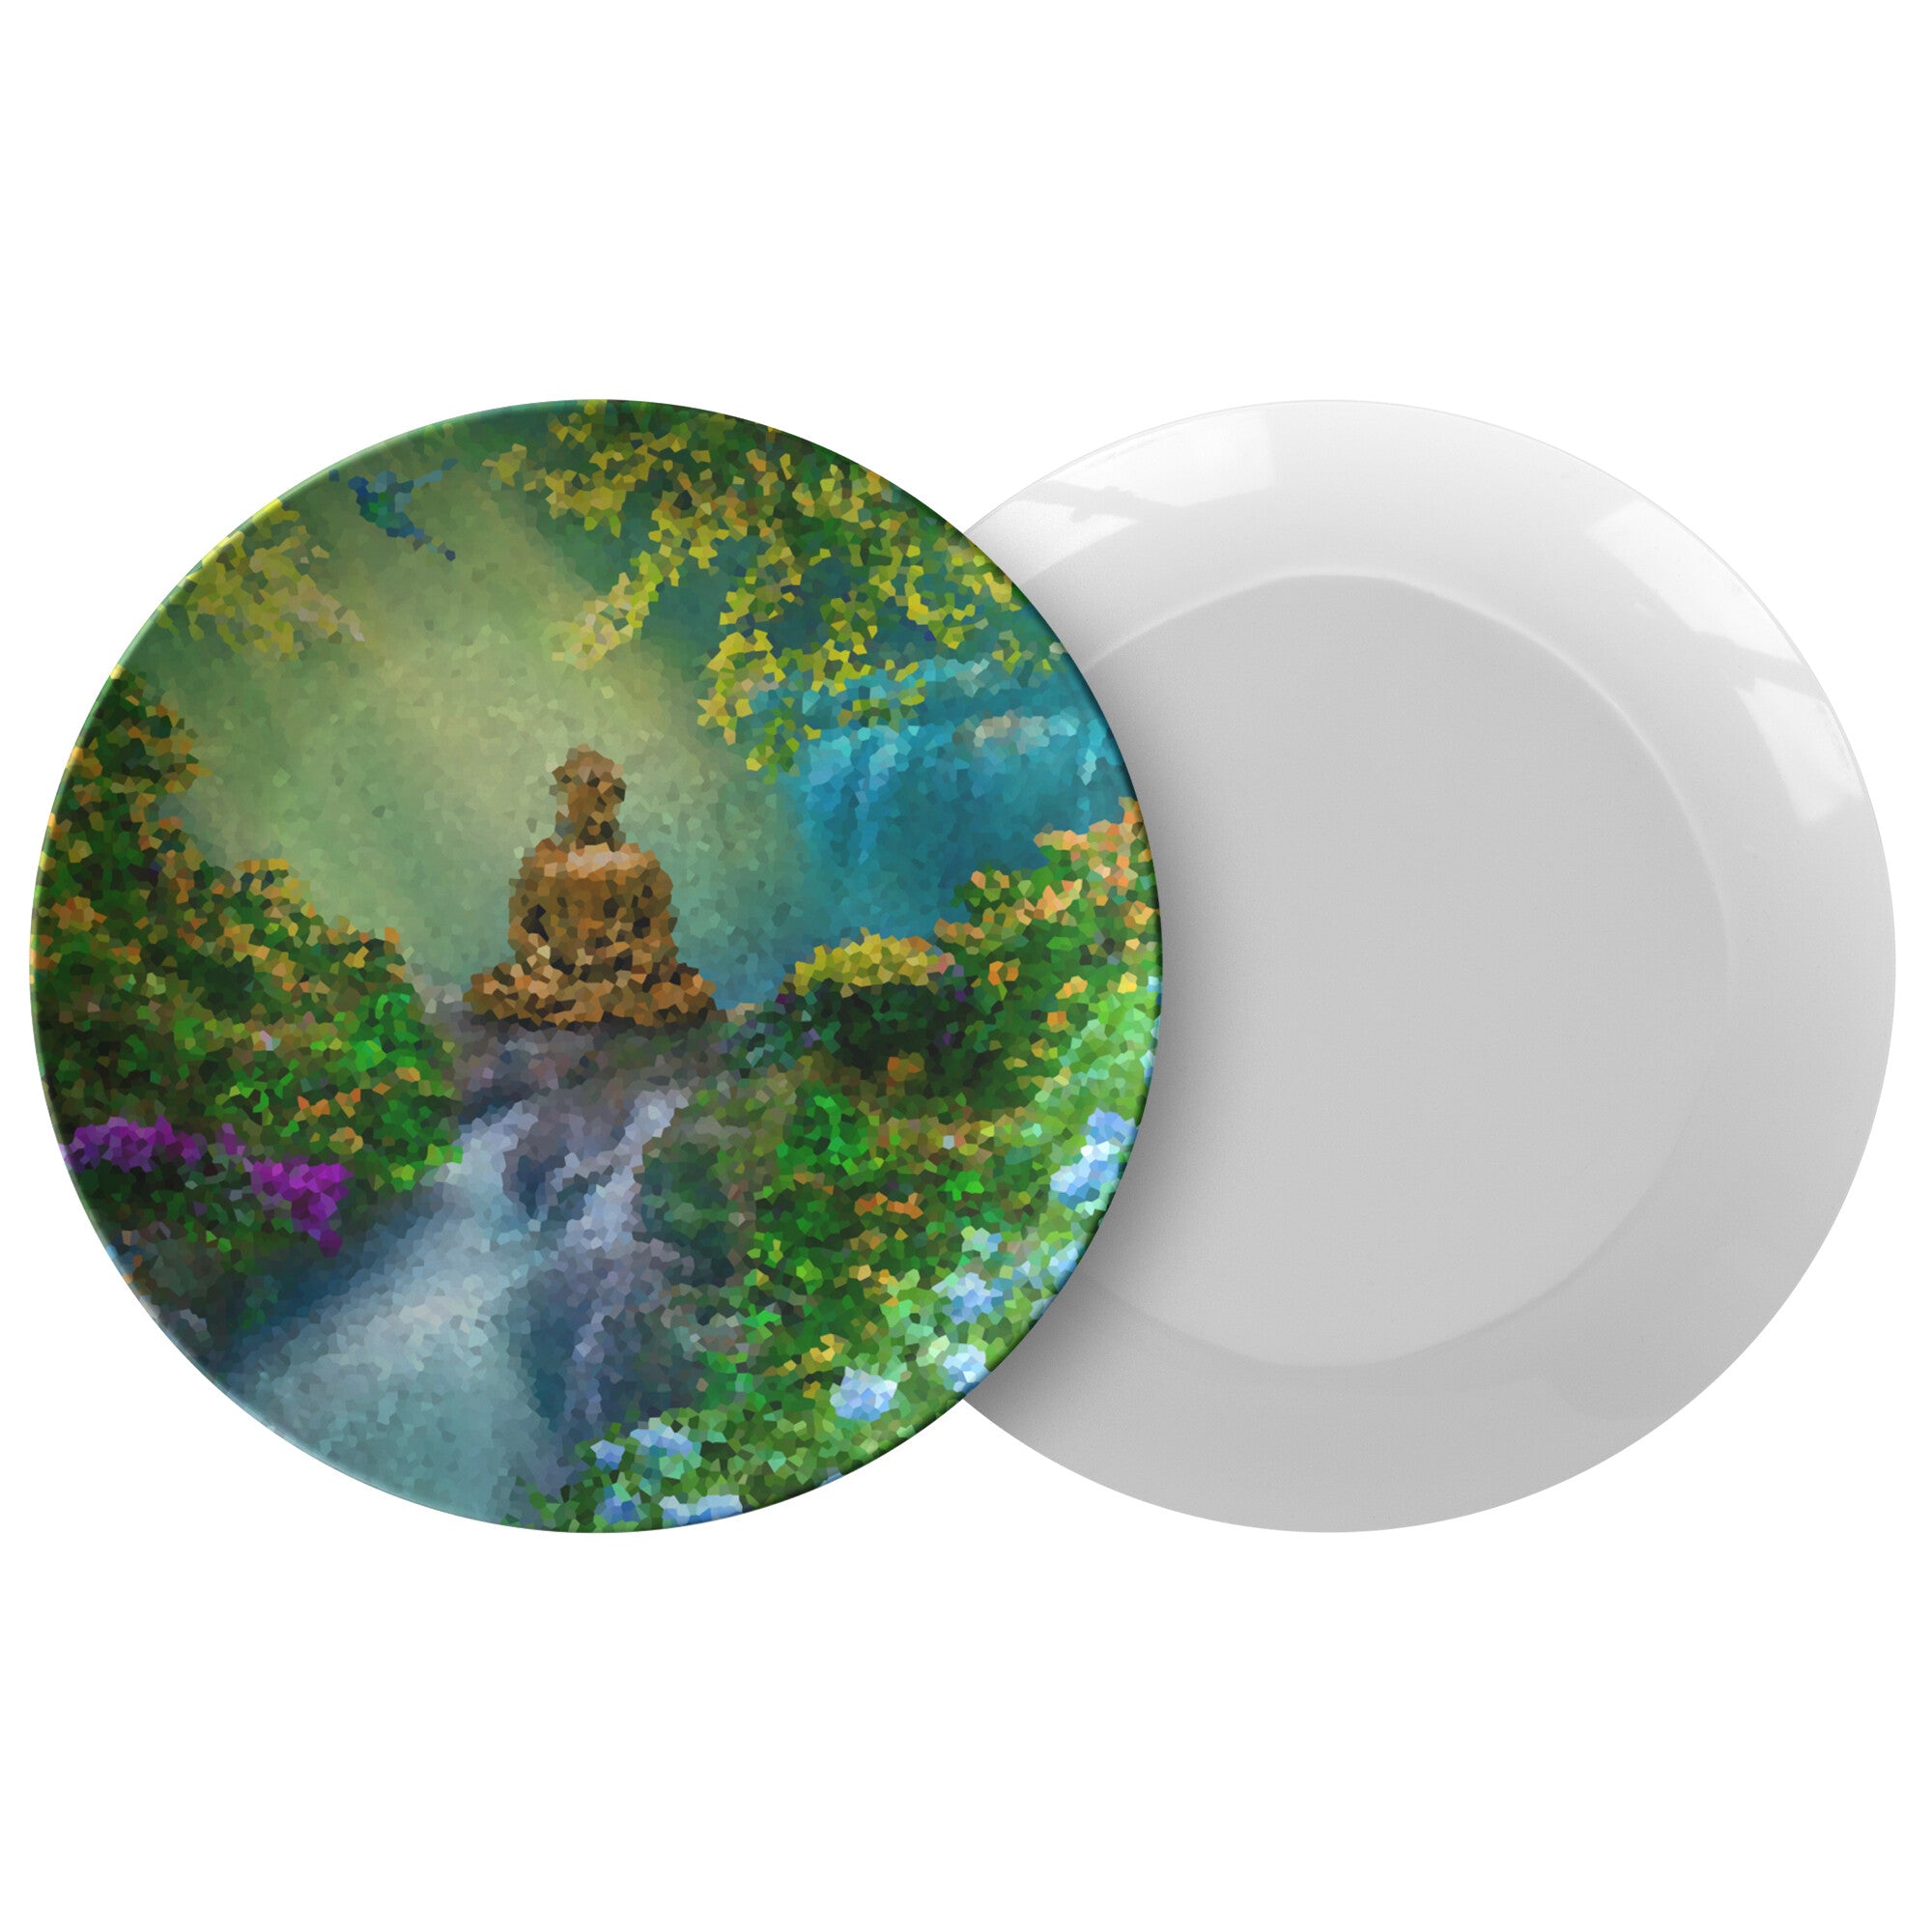 Love and Light - Handmade Art Zen Plate Yoga and Meditation Products - Personal Hour